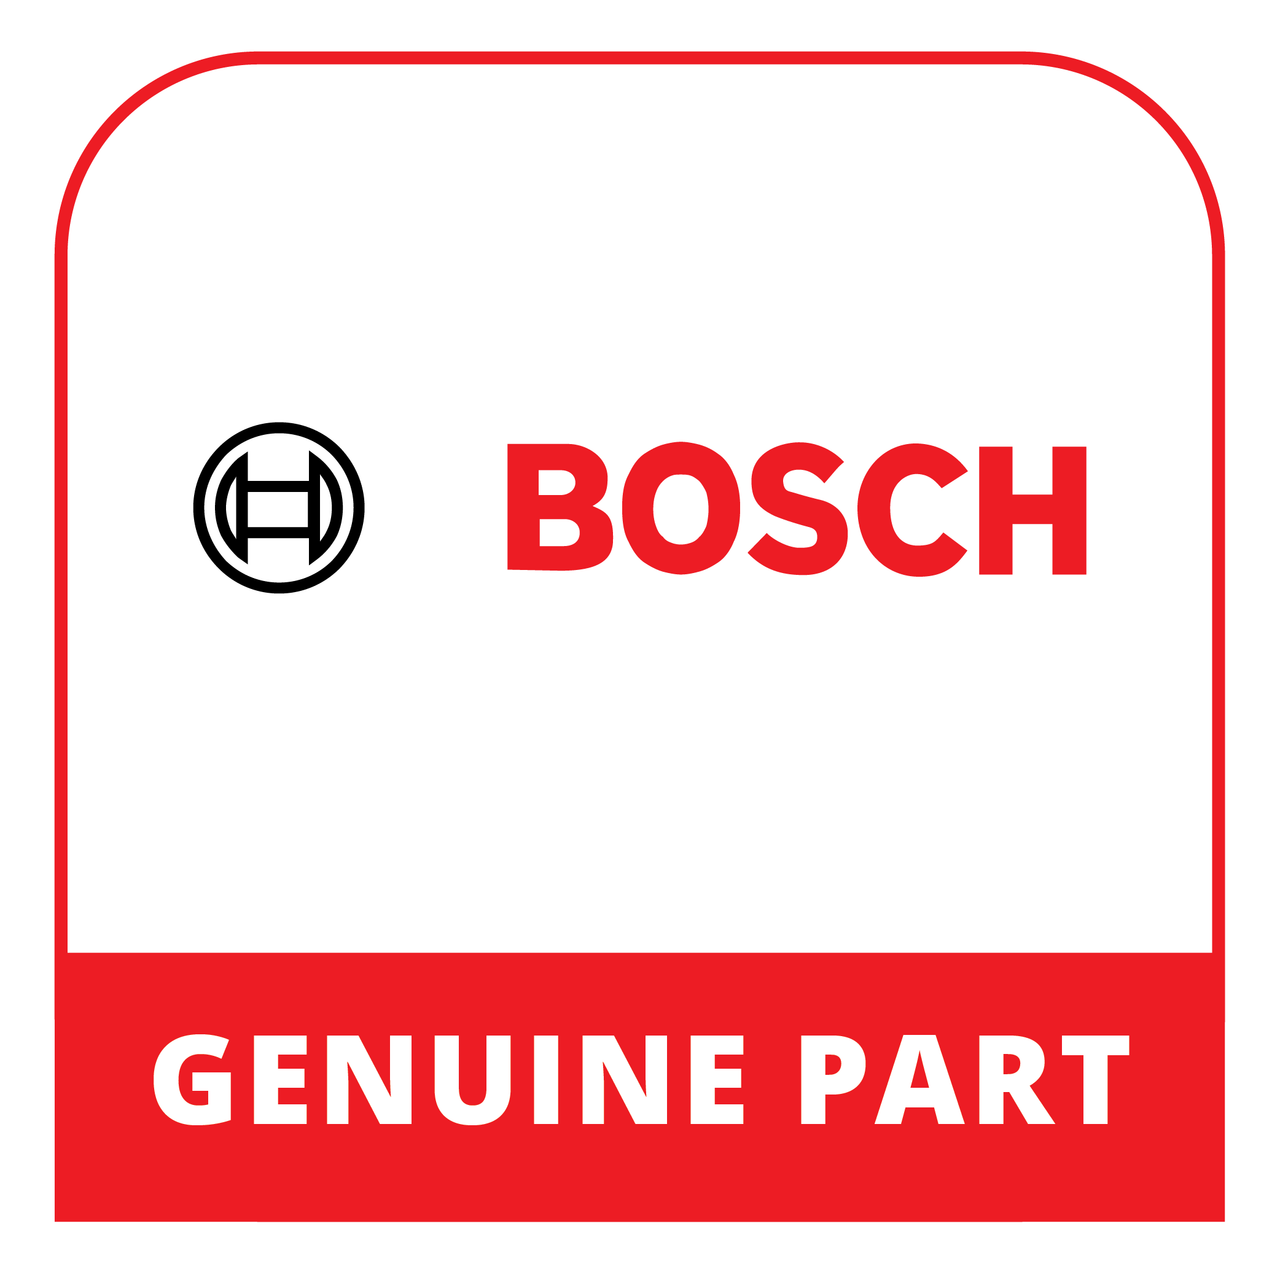 Bosch (Thermador) 12037545 - Fuse-Thermal - Genuine Bosch (Thermador) Part